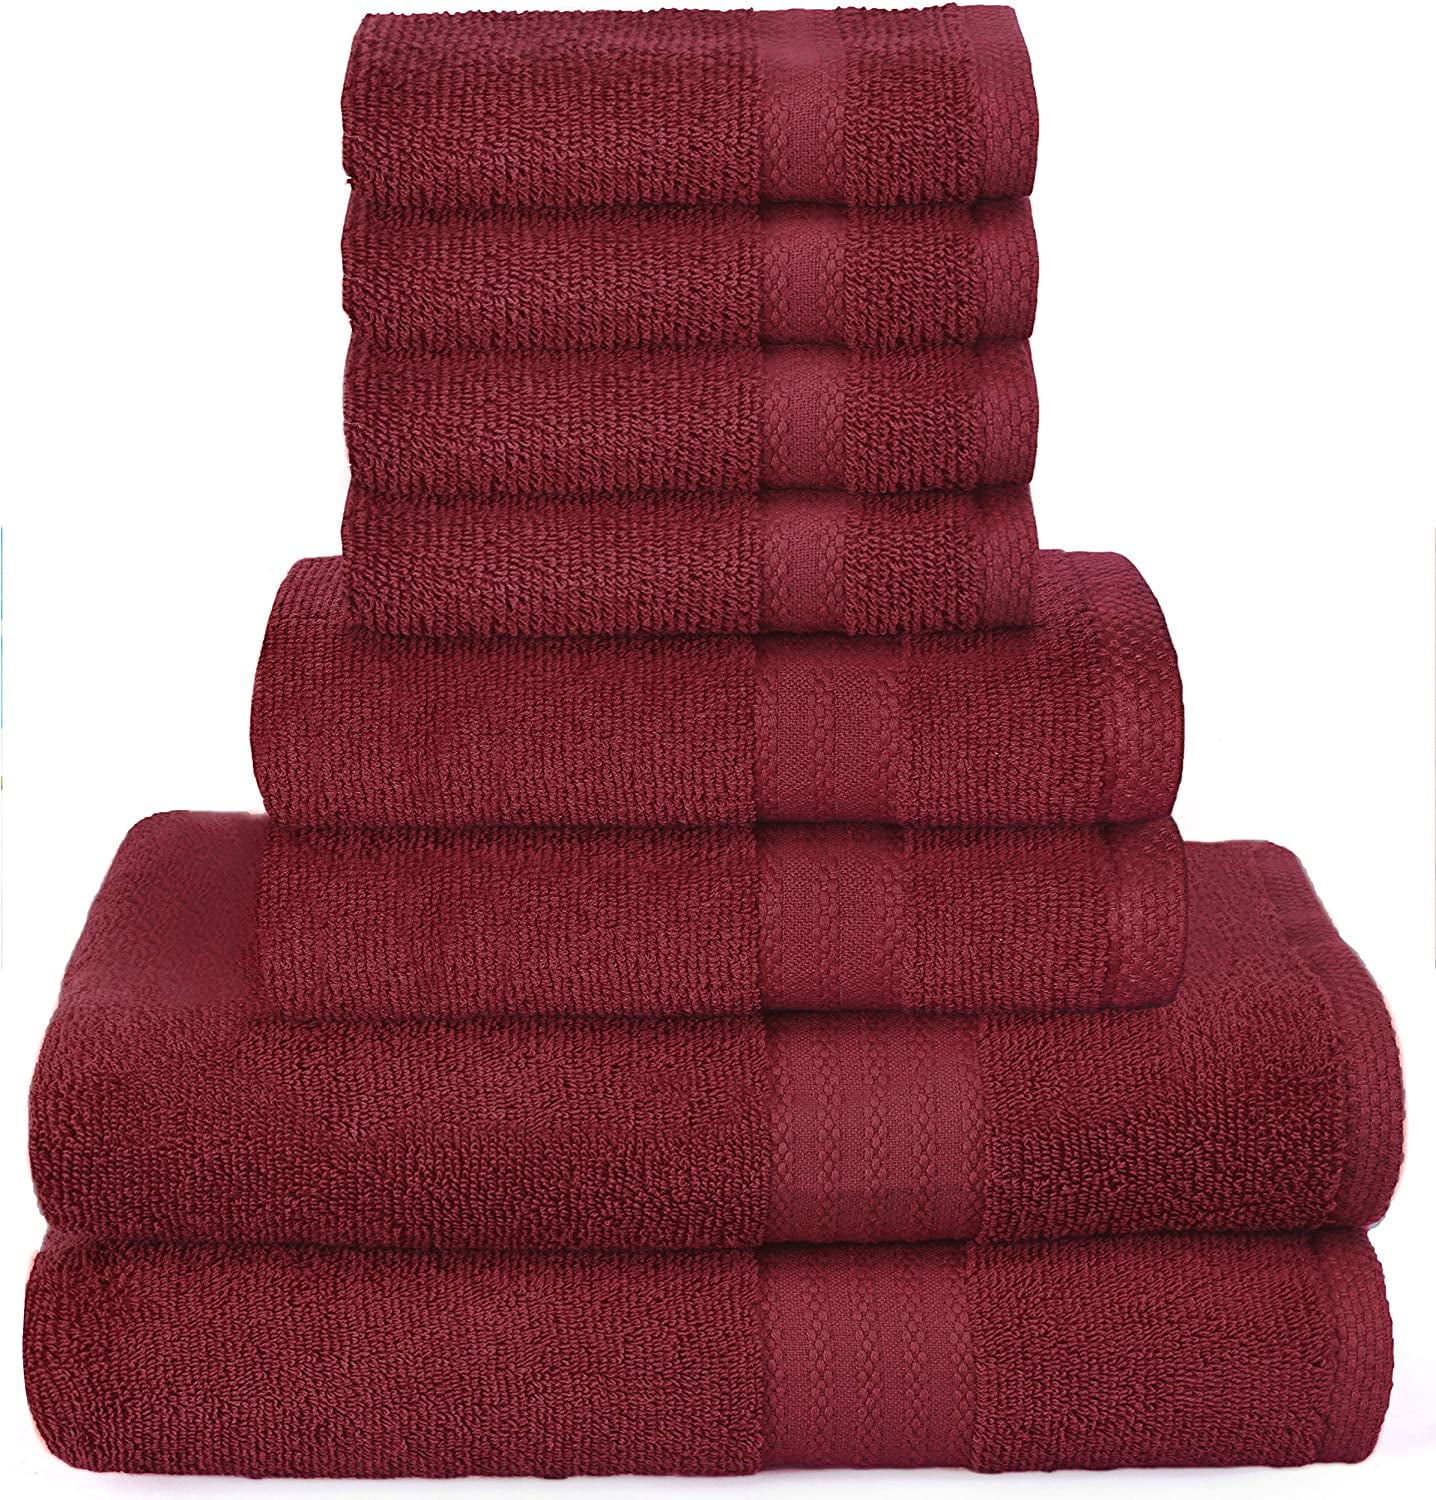 Monarch Linen True Color Ring-Spun Cotton Hand Towels, Ring Spun Cotton, 16x27 in., Six Colors, Buy A 12-Pack or A Case of 120, Burgundy